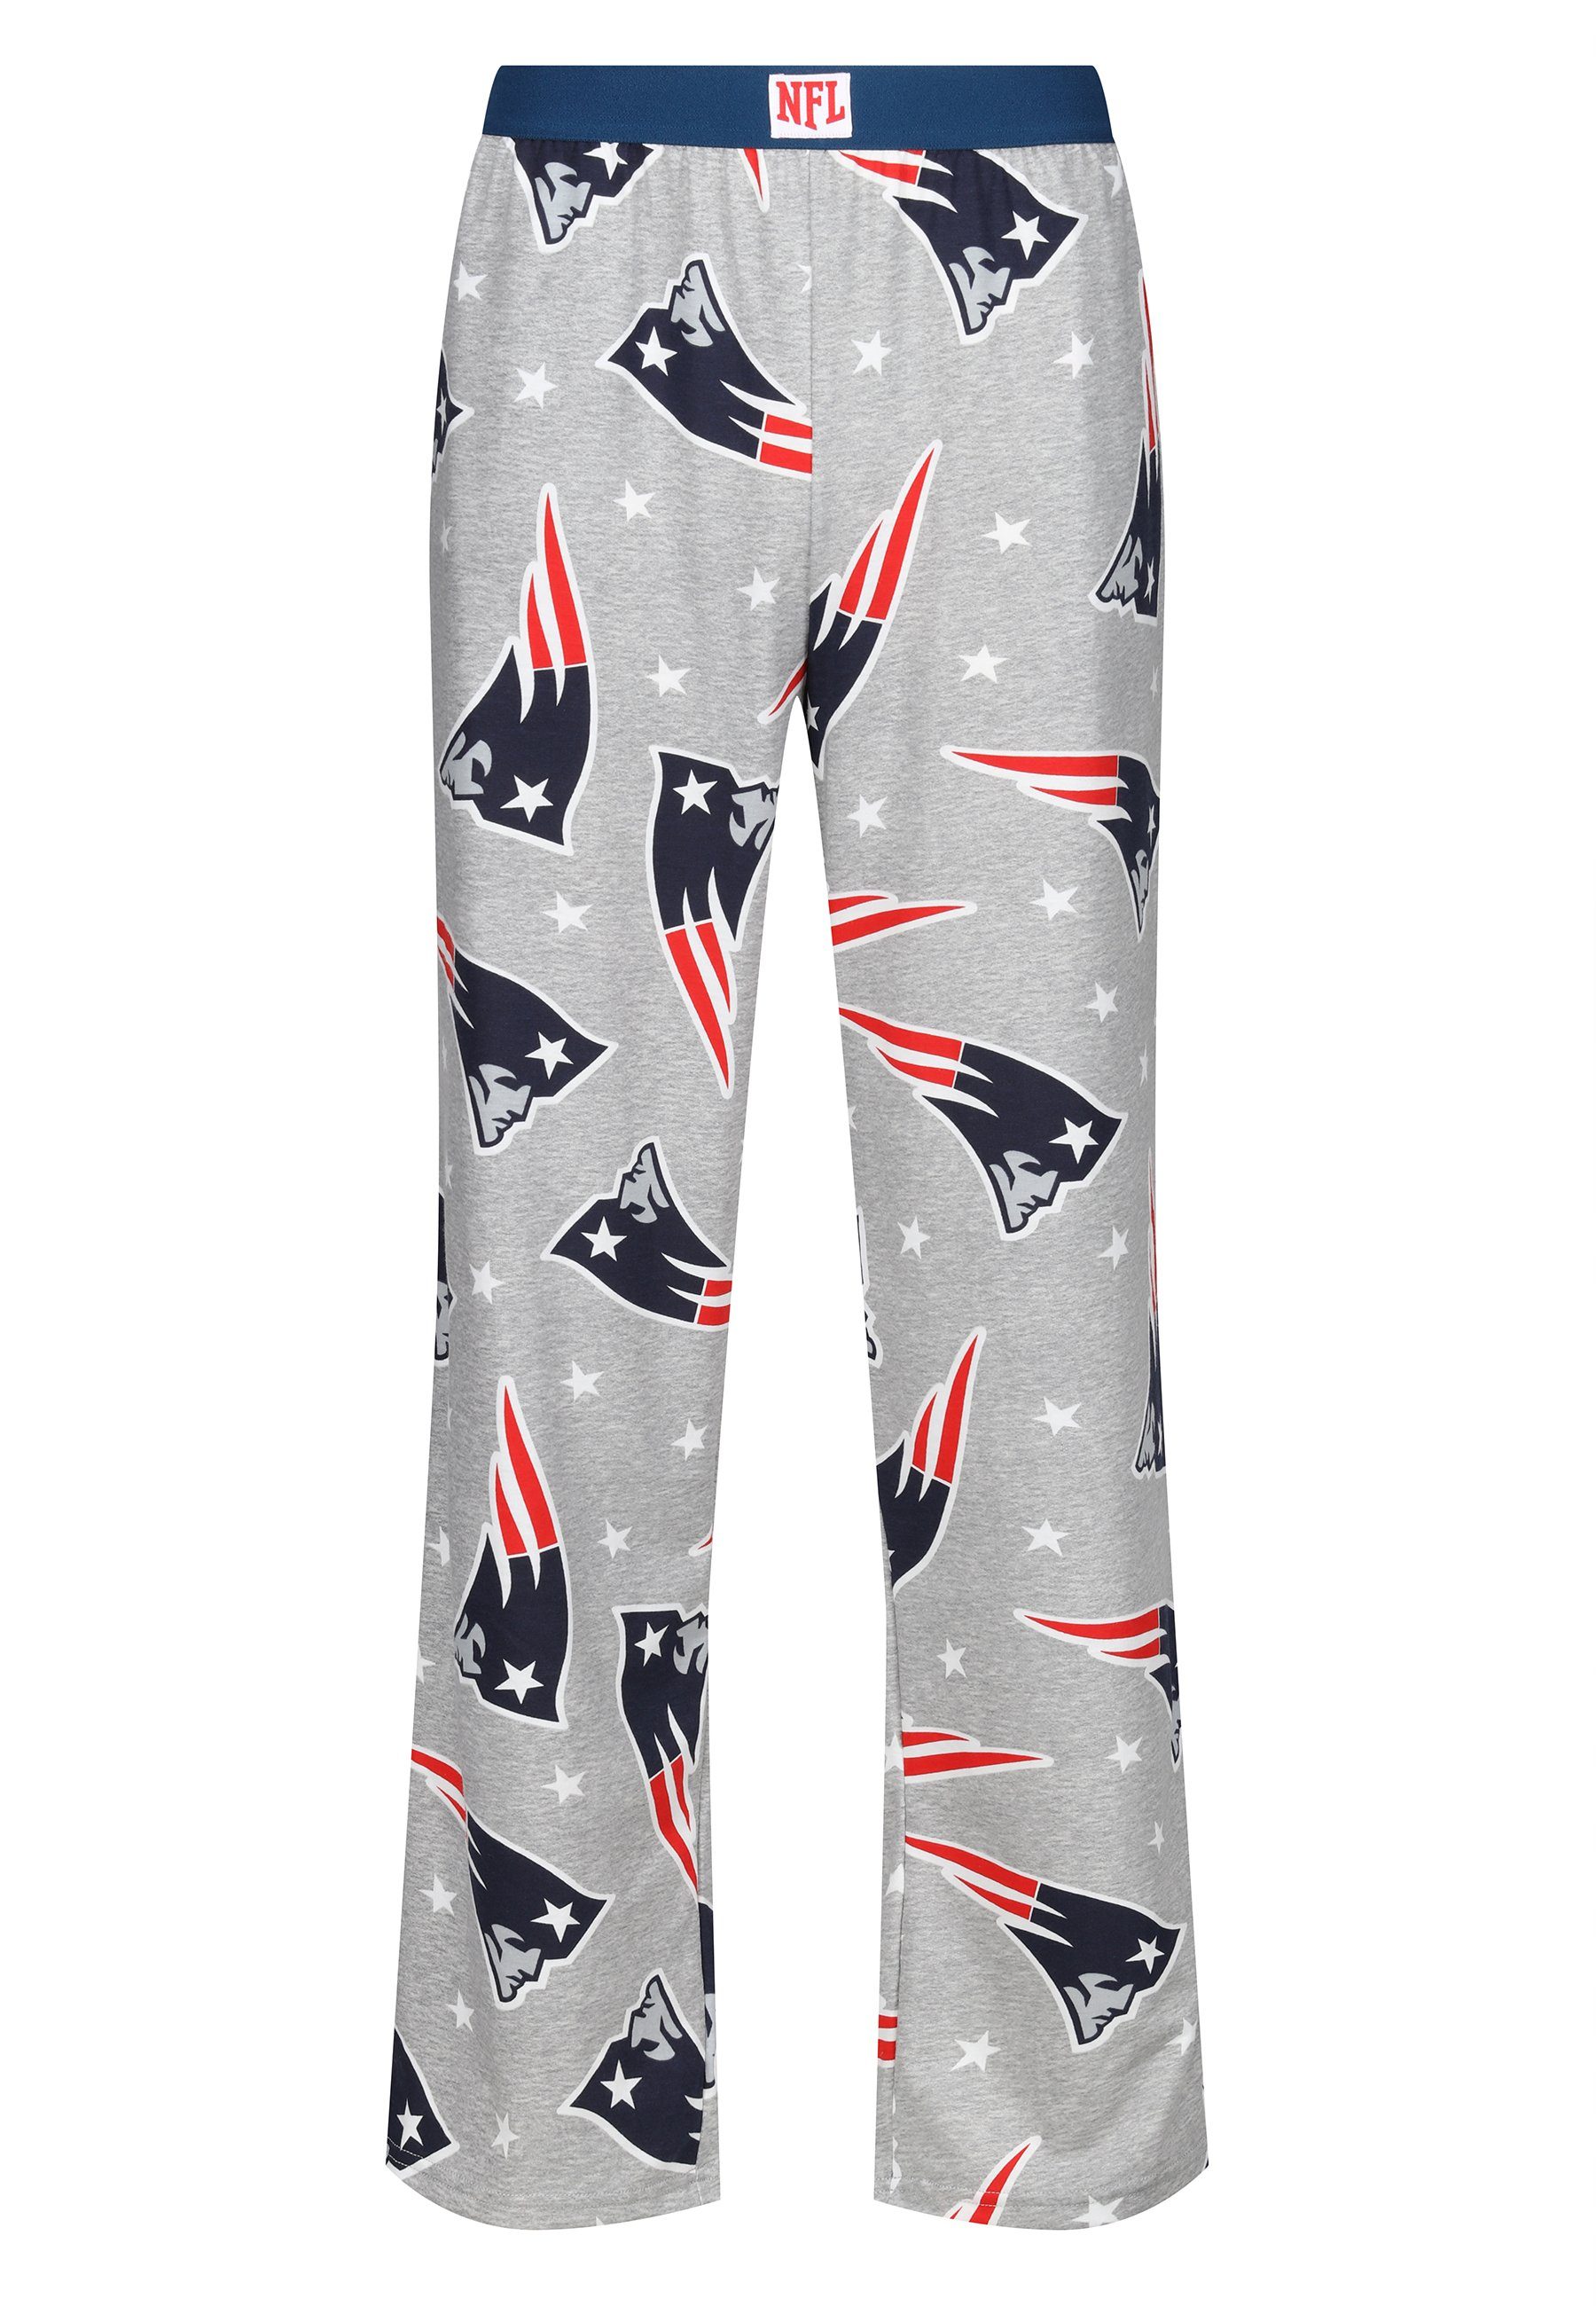 Recovered Loungepants Loungepants New Stars Patriots Logo England Marl NFL and Grey